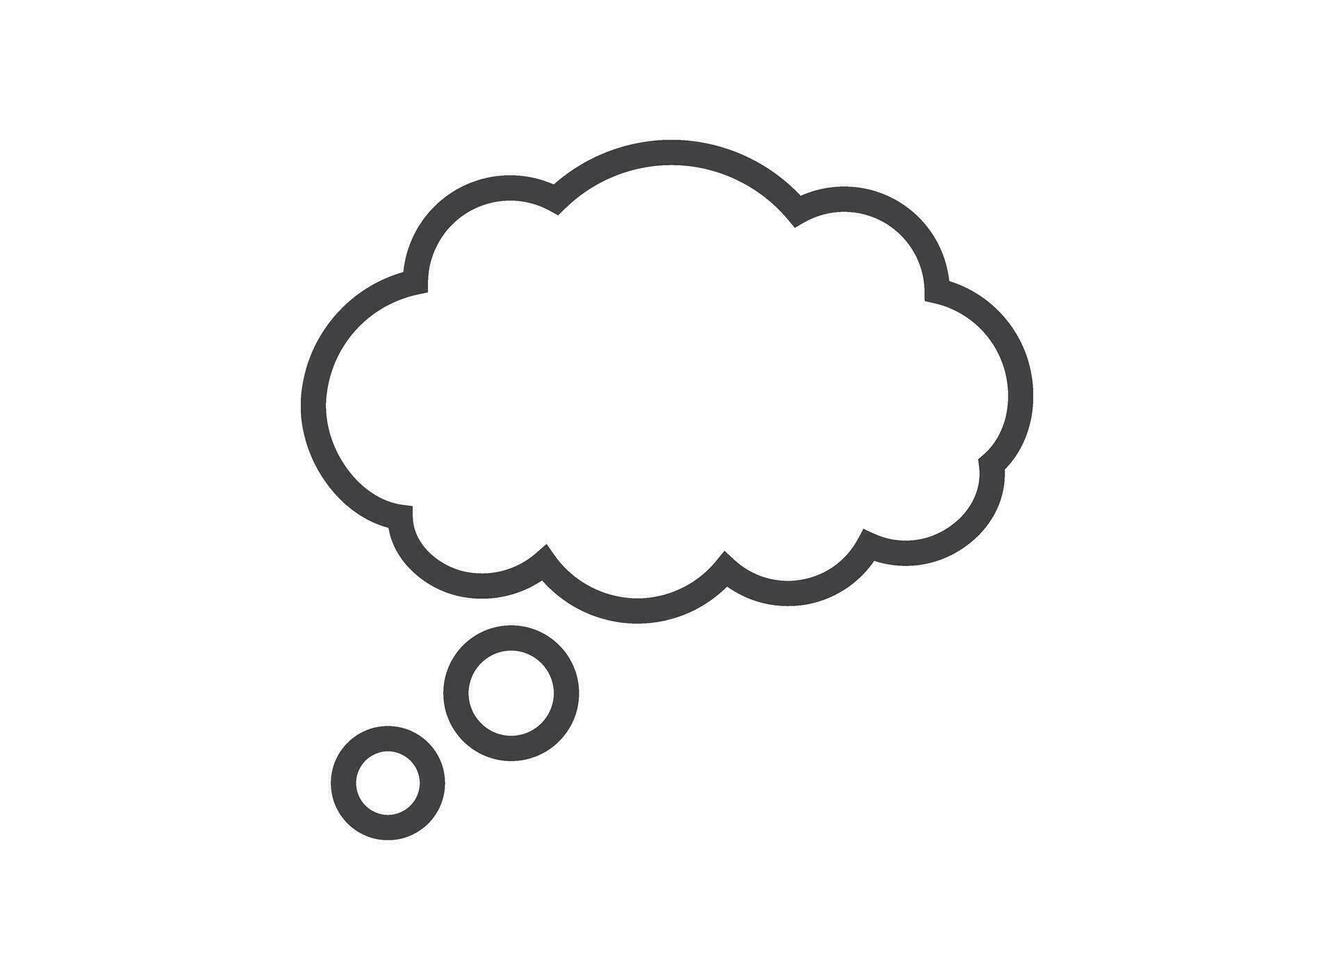 Dialogue balloon icon in flat style. Speech bubble vector illustration on isolated background. Comment sign business concept.